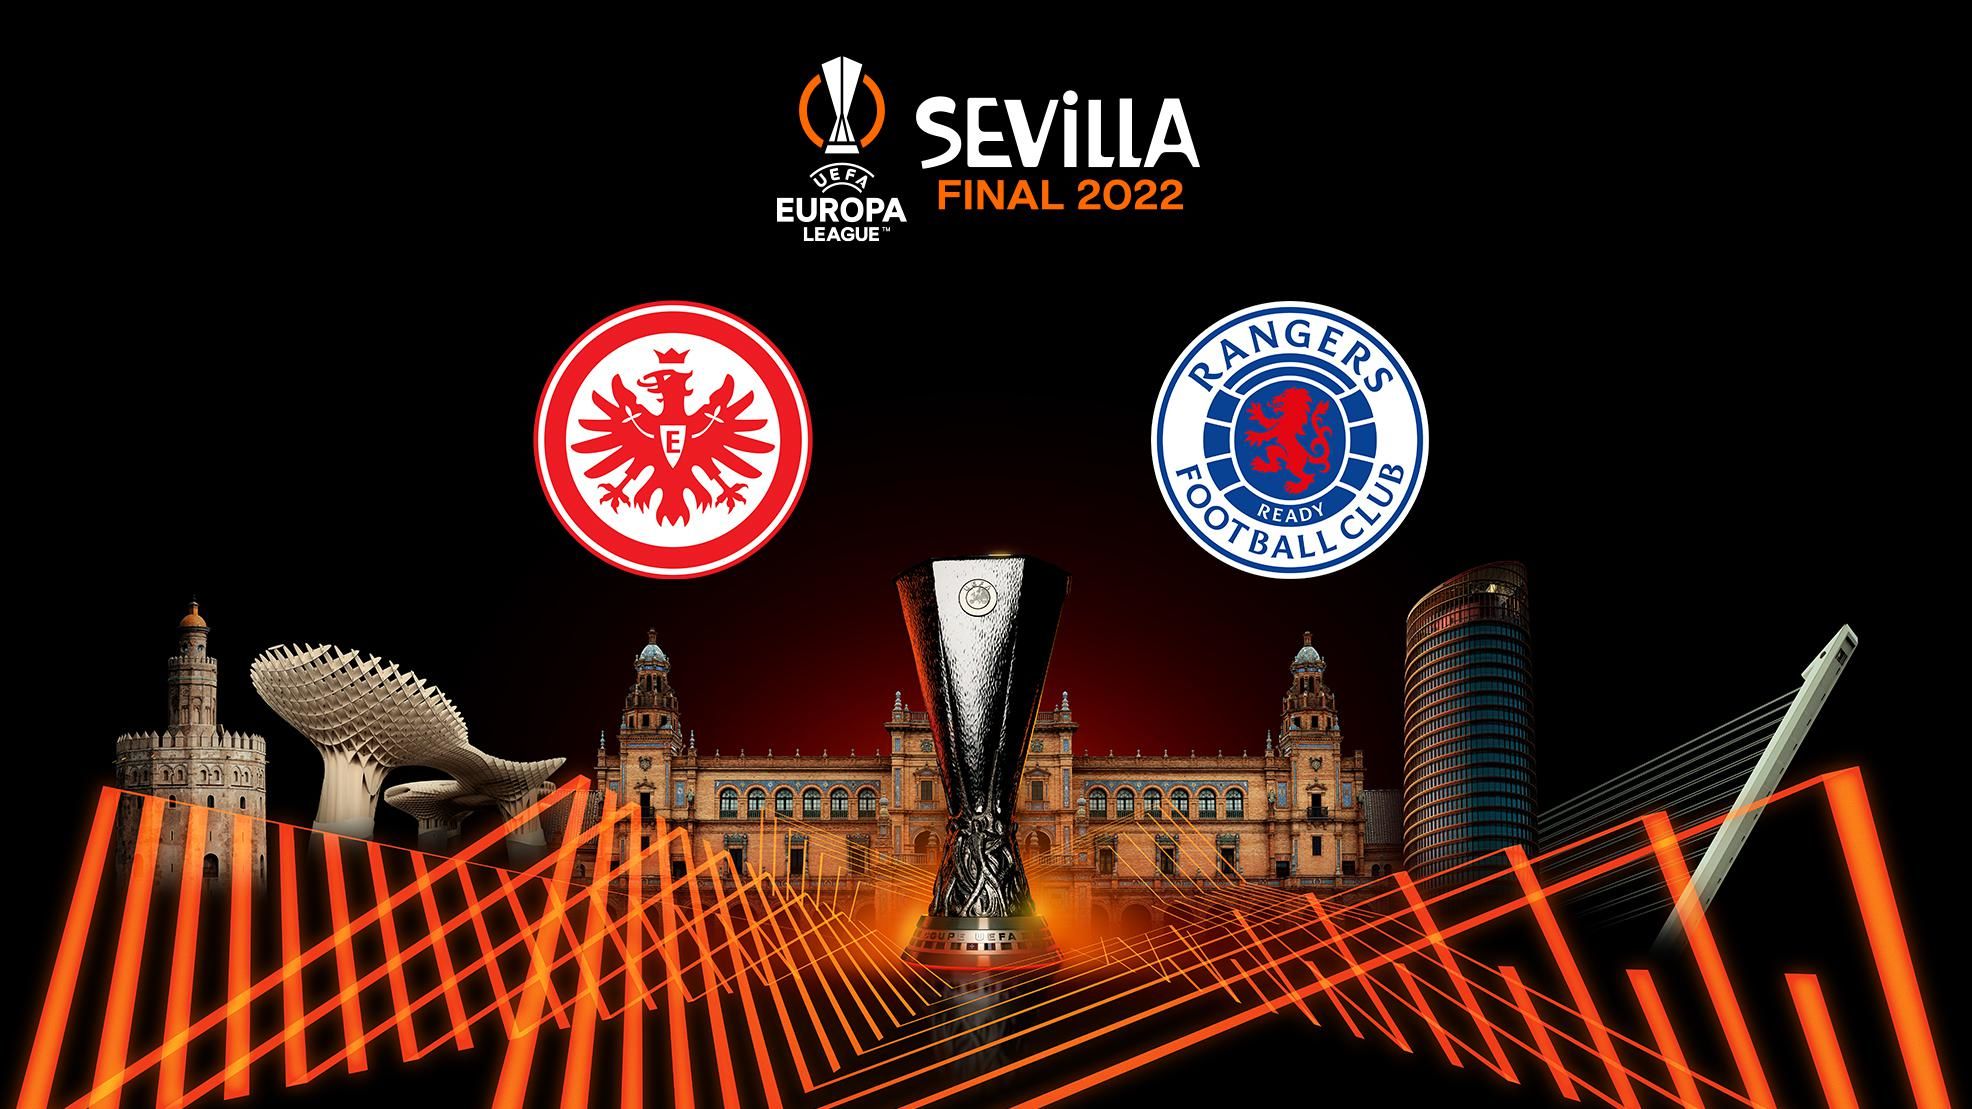 Europa League final: Eintracht Frankfurt vs Rangers Match Preview, Where to Watch, Odds and Lineups | May 18